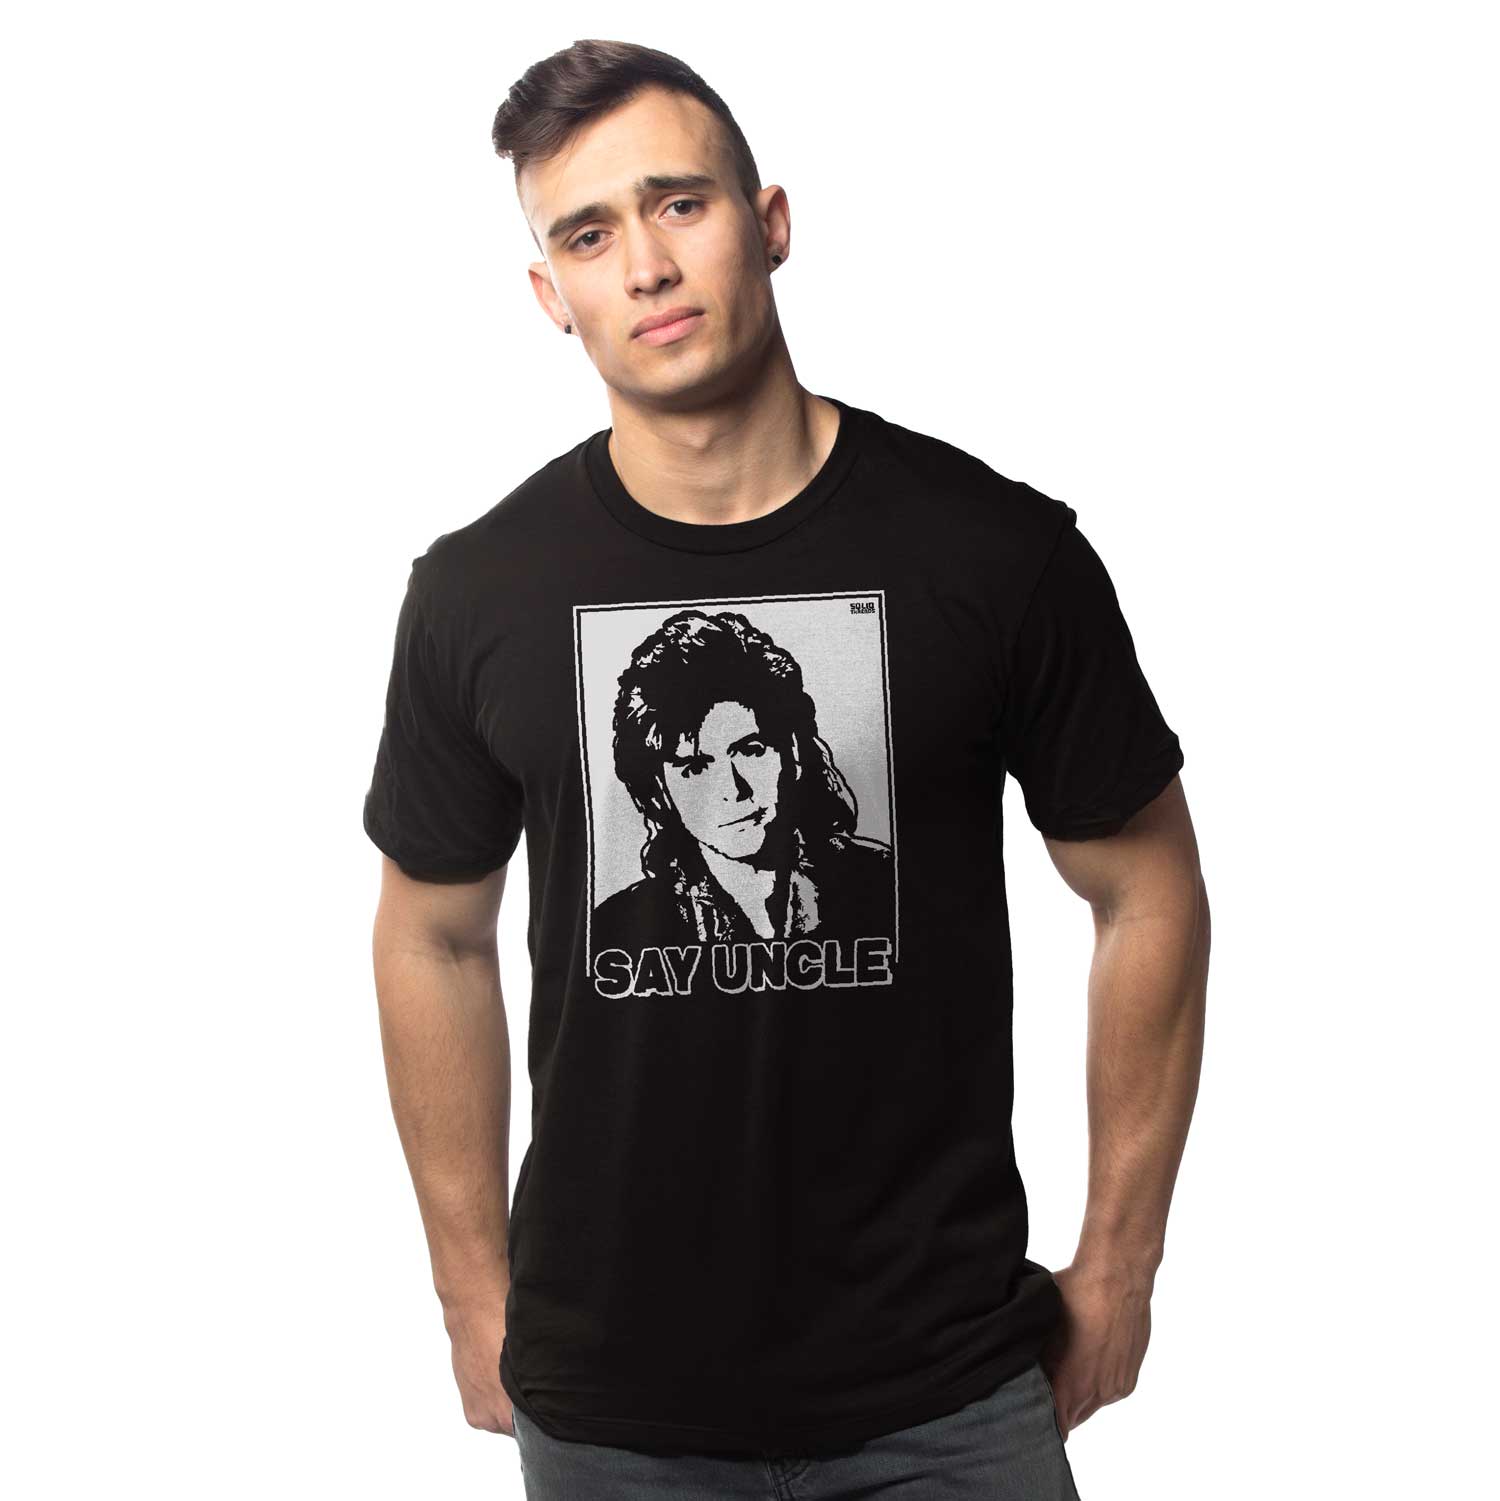 Say Uncle Jon Stamos Funny Graphic T-Shirt | Retro Full House Tee True Black / Large